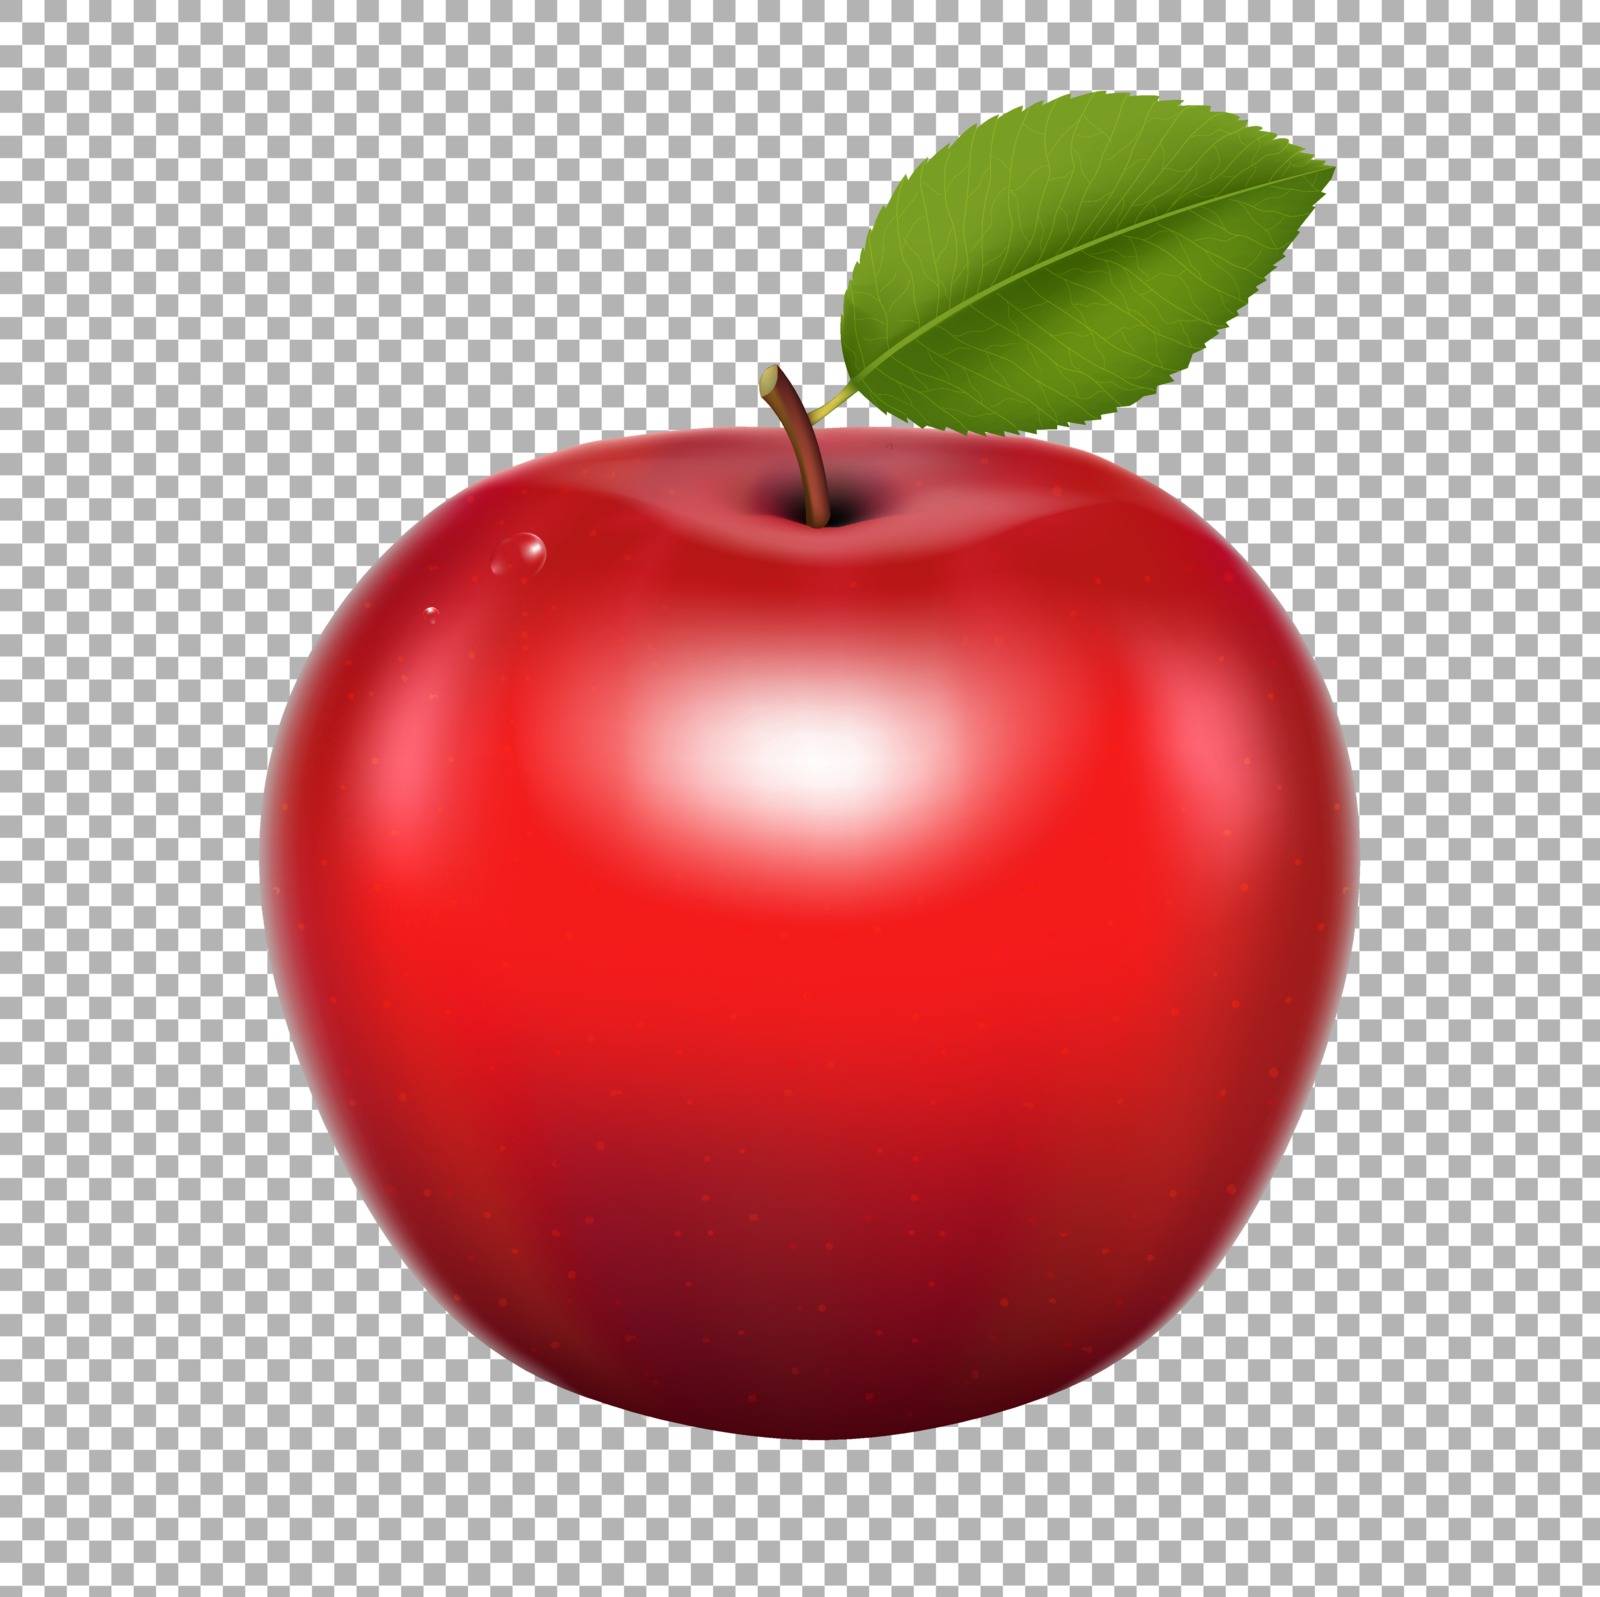 Red Apple With Gradient Mesh, Vector Illustration